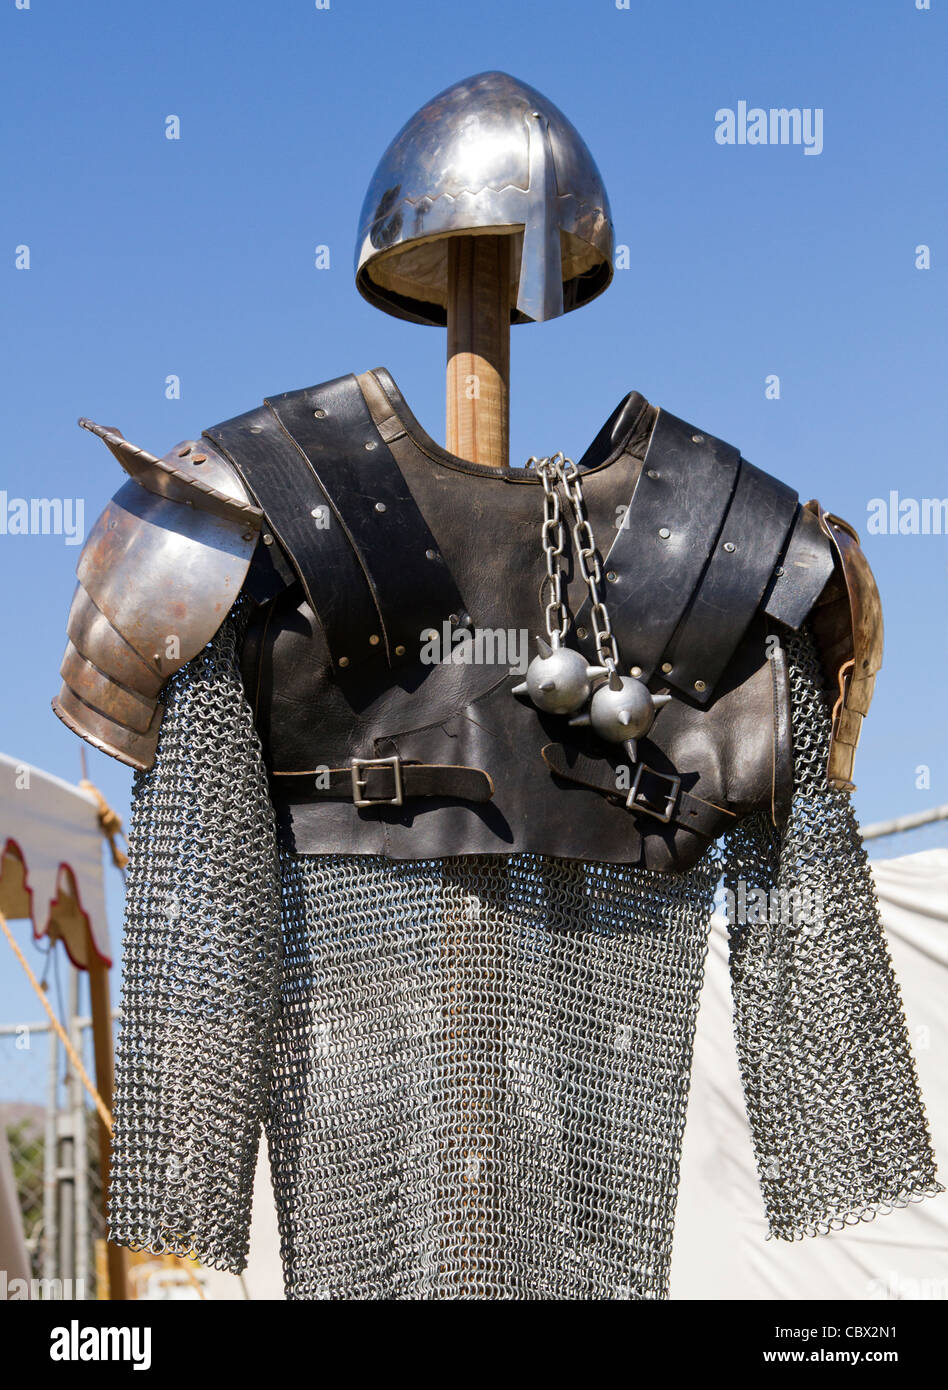 Fantasy Medieval Warrior Chainmail Armor Stock Photo by ©Ravven 396193726